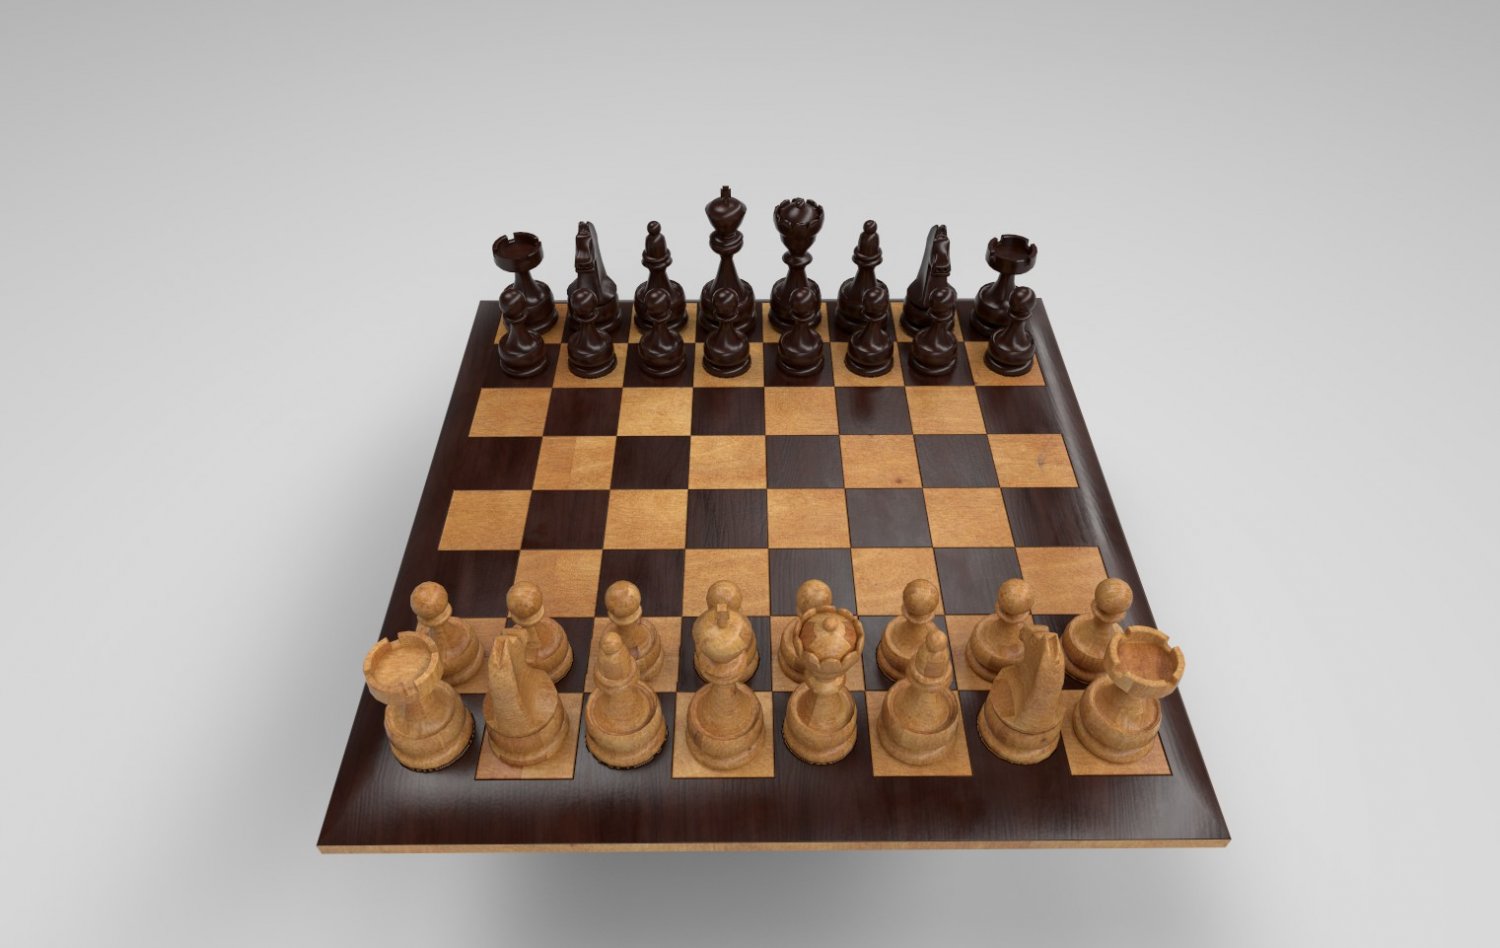 Download 3D Chess Unlimited for Windows 